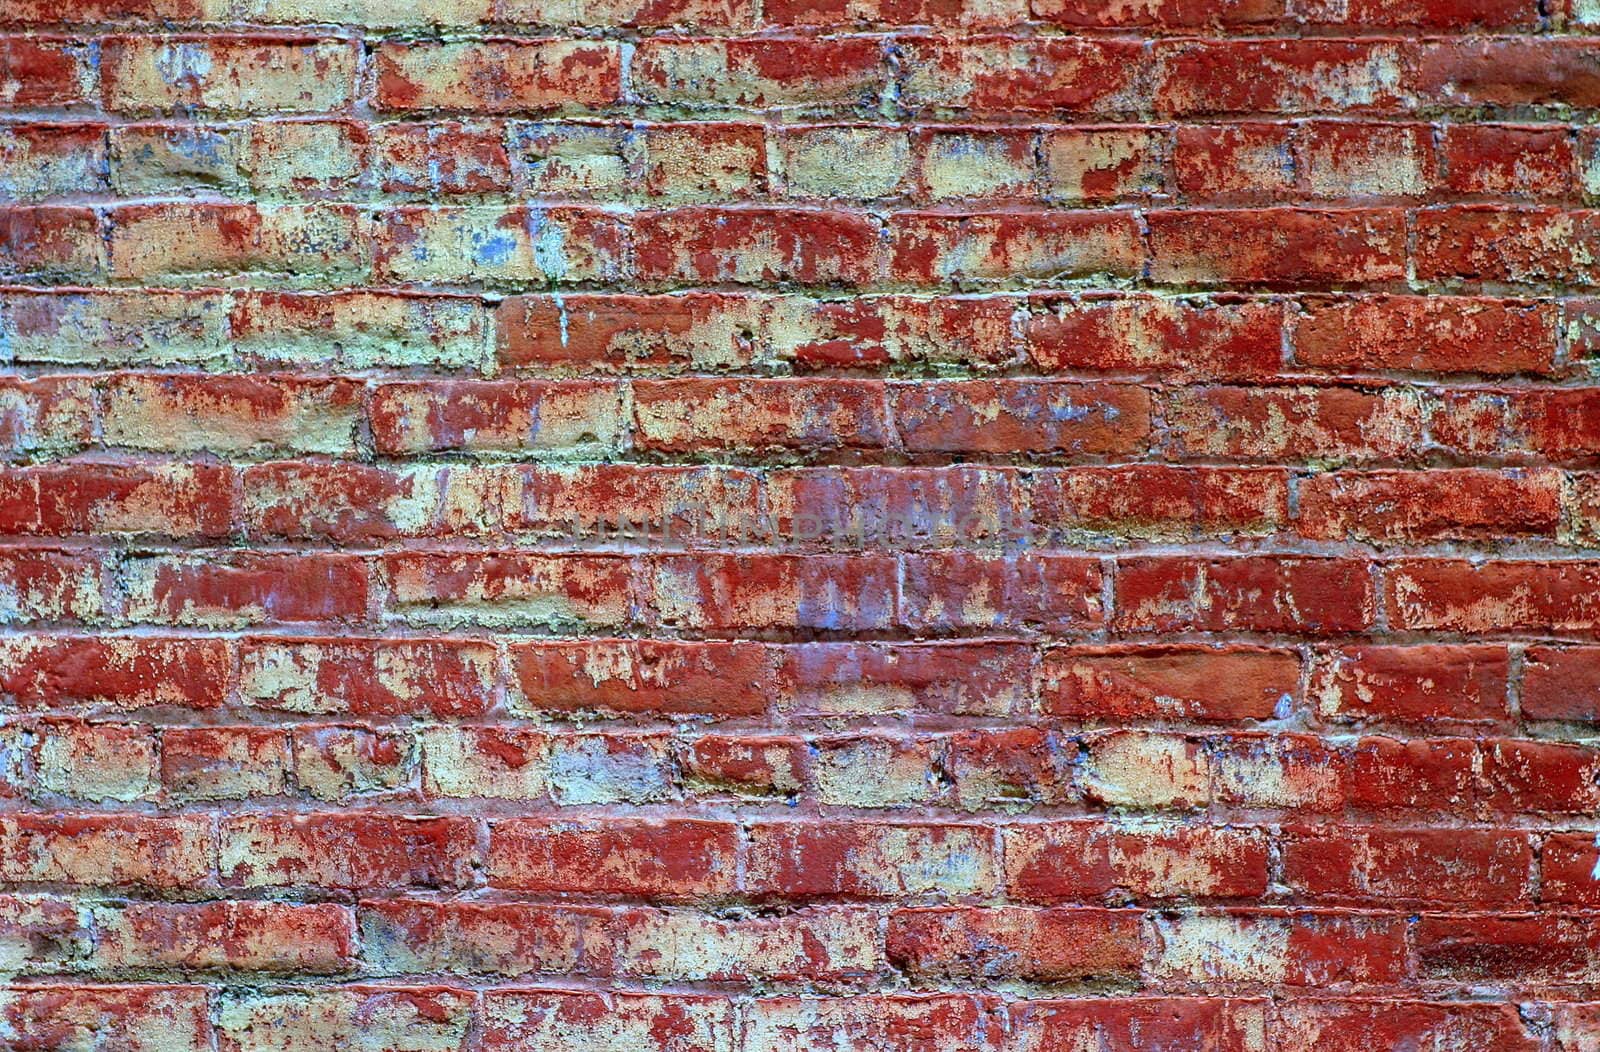 Red bricks wall with an regular pattern as a background